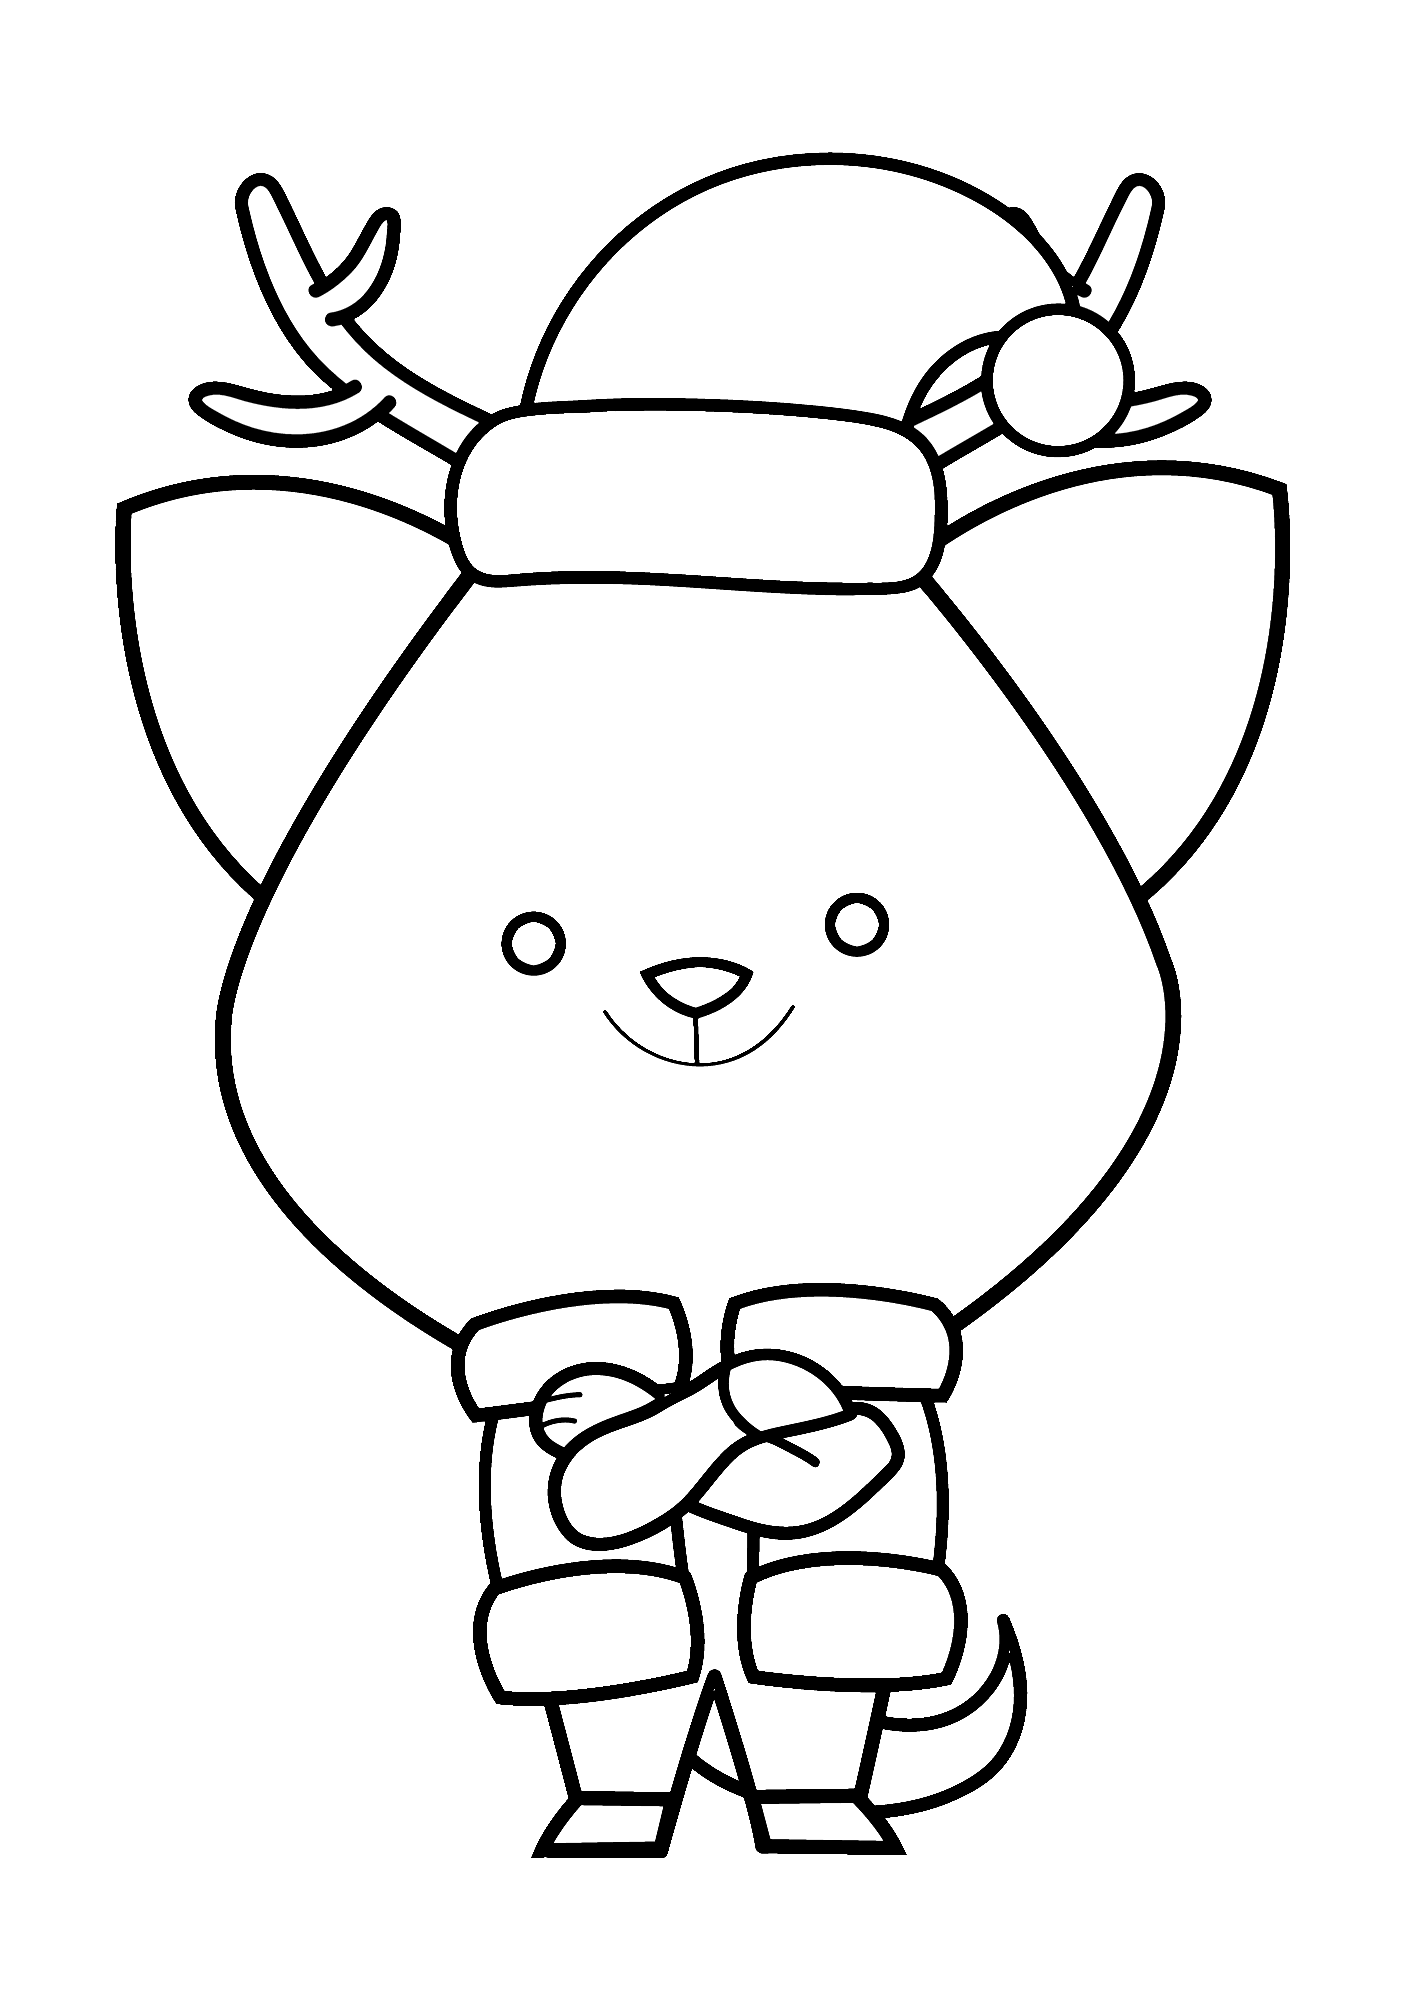 Realistic Deer Coloring Pages